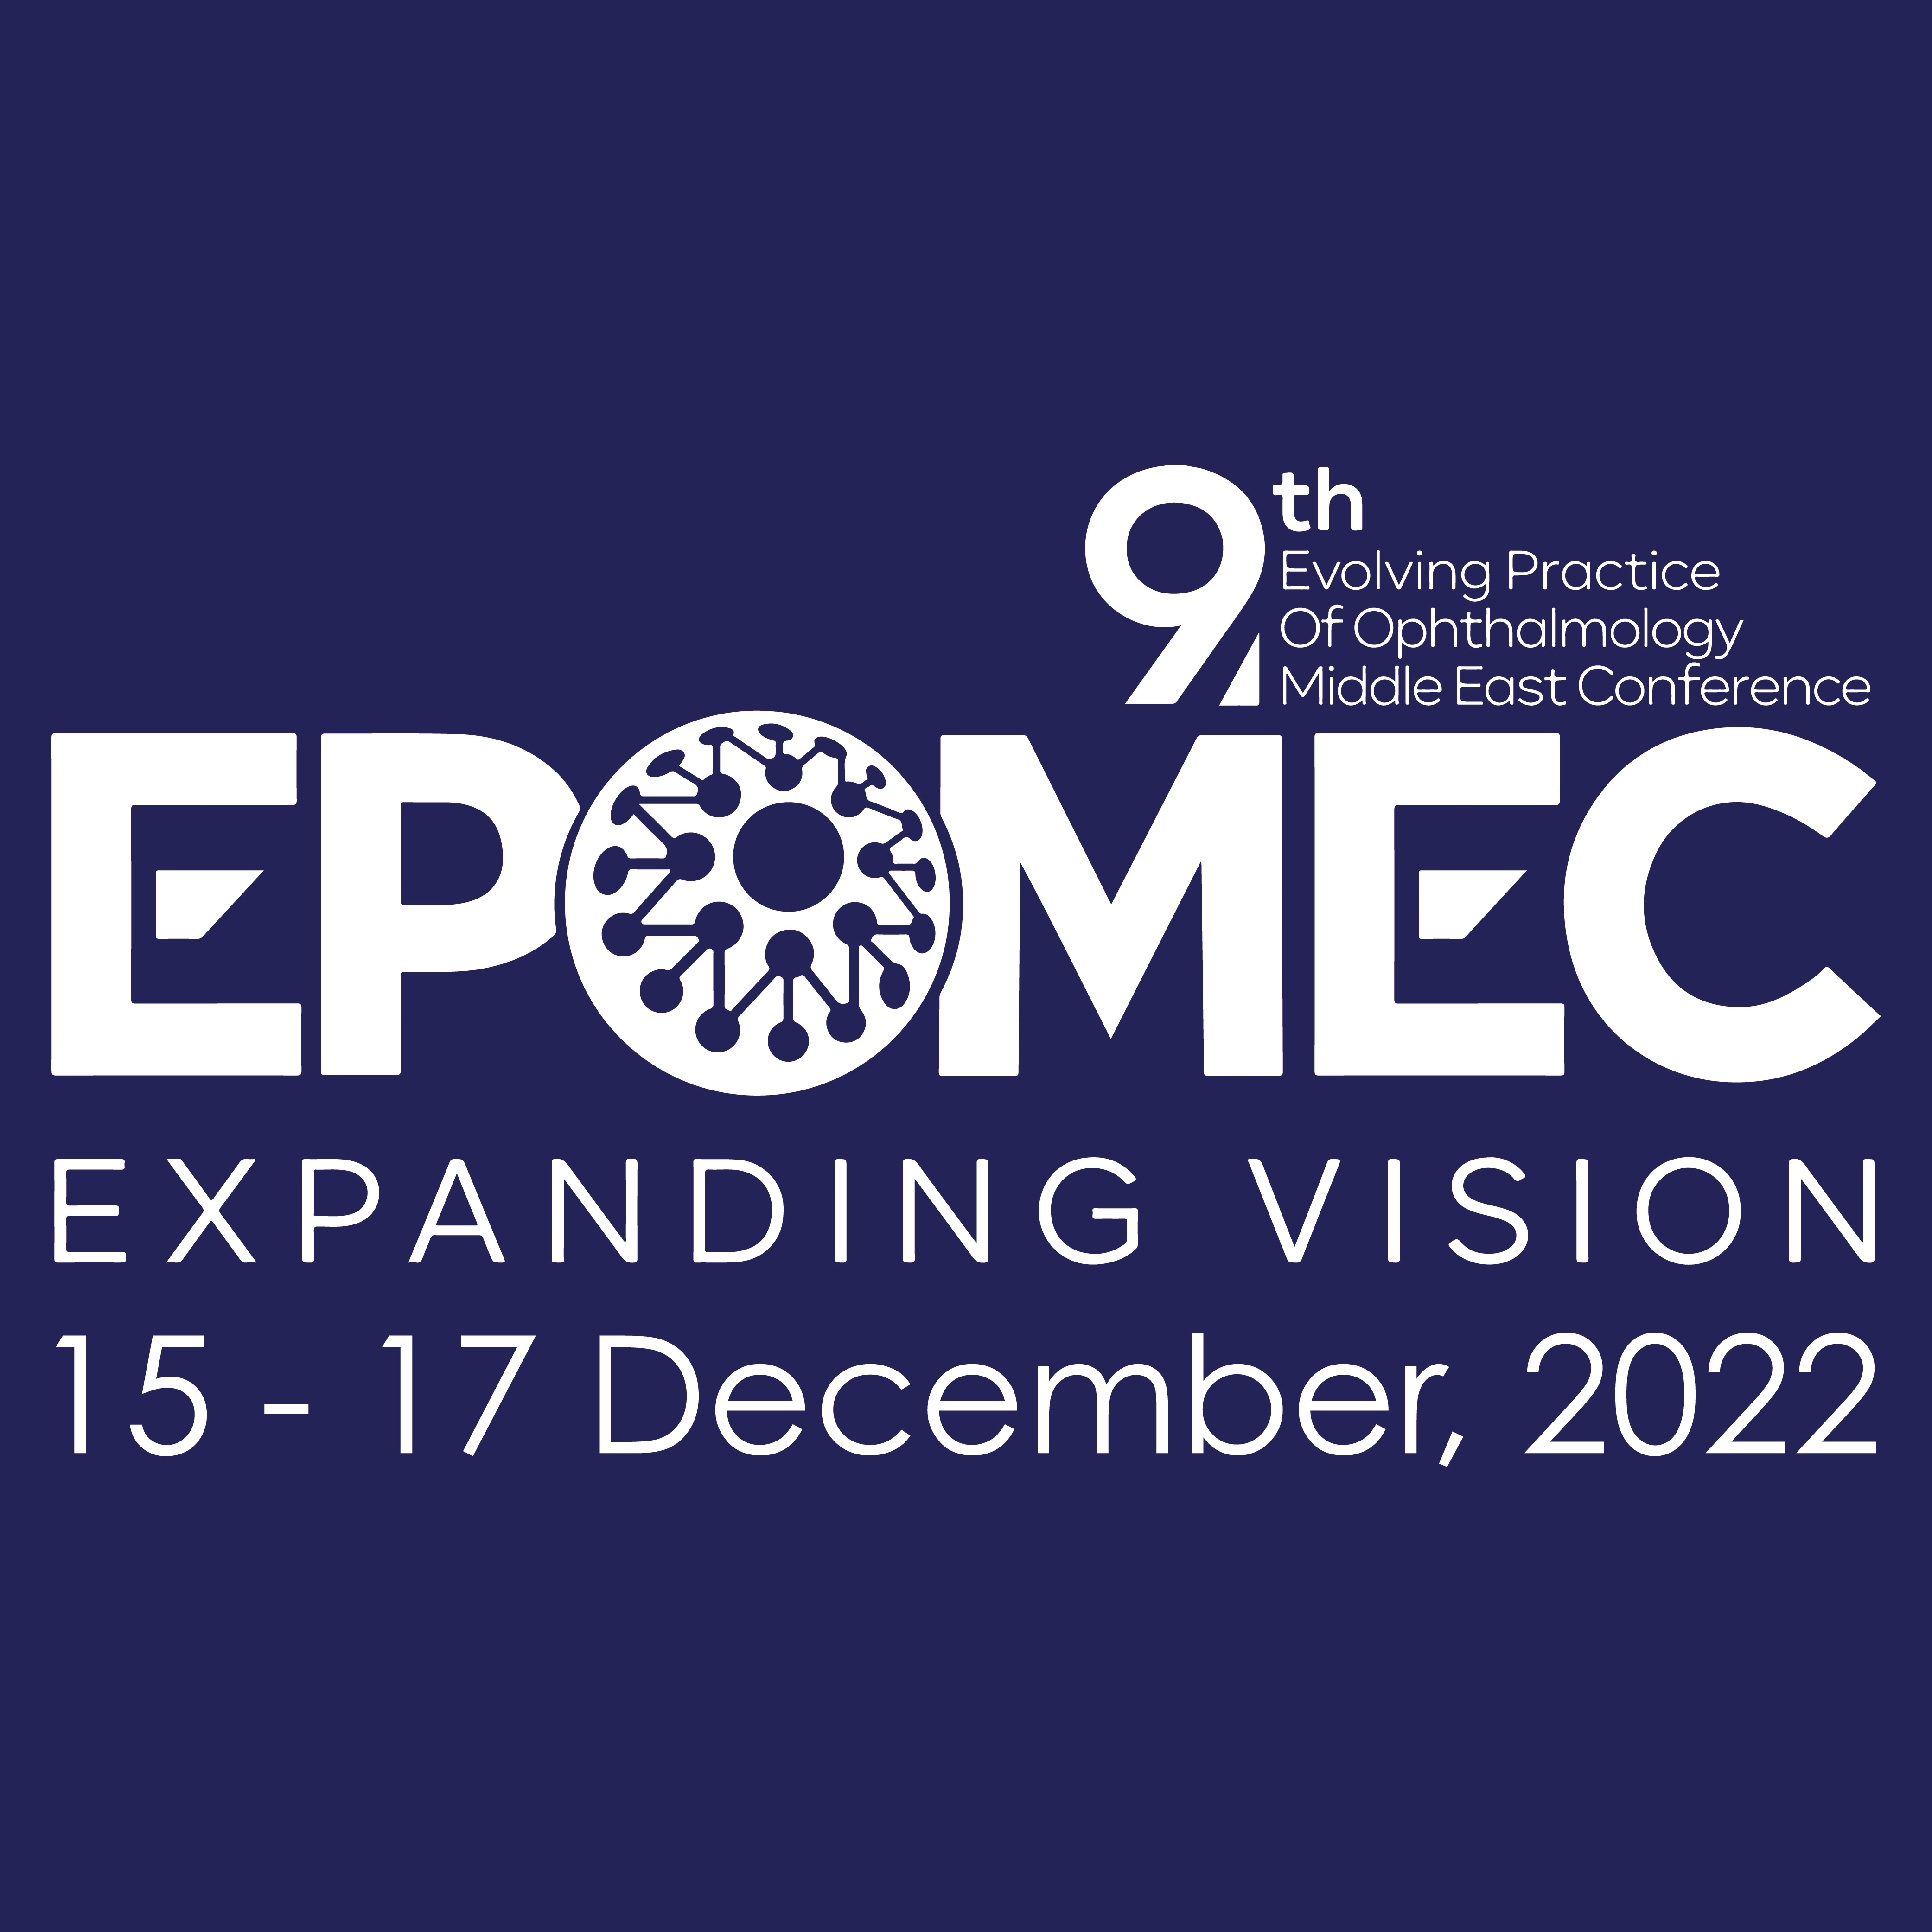 Evolving Practice of Ophthalmology Middle East Conference